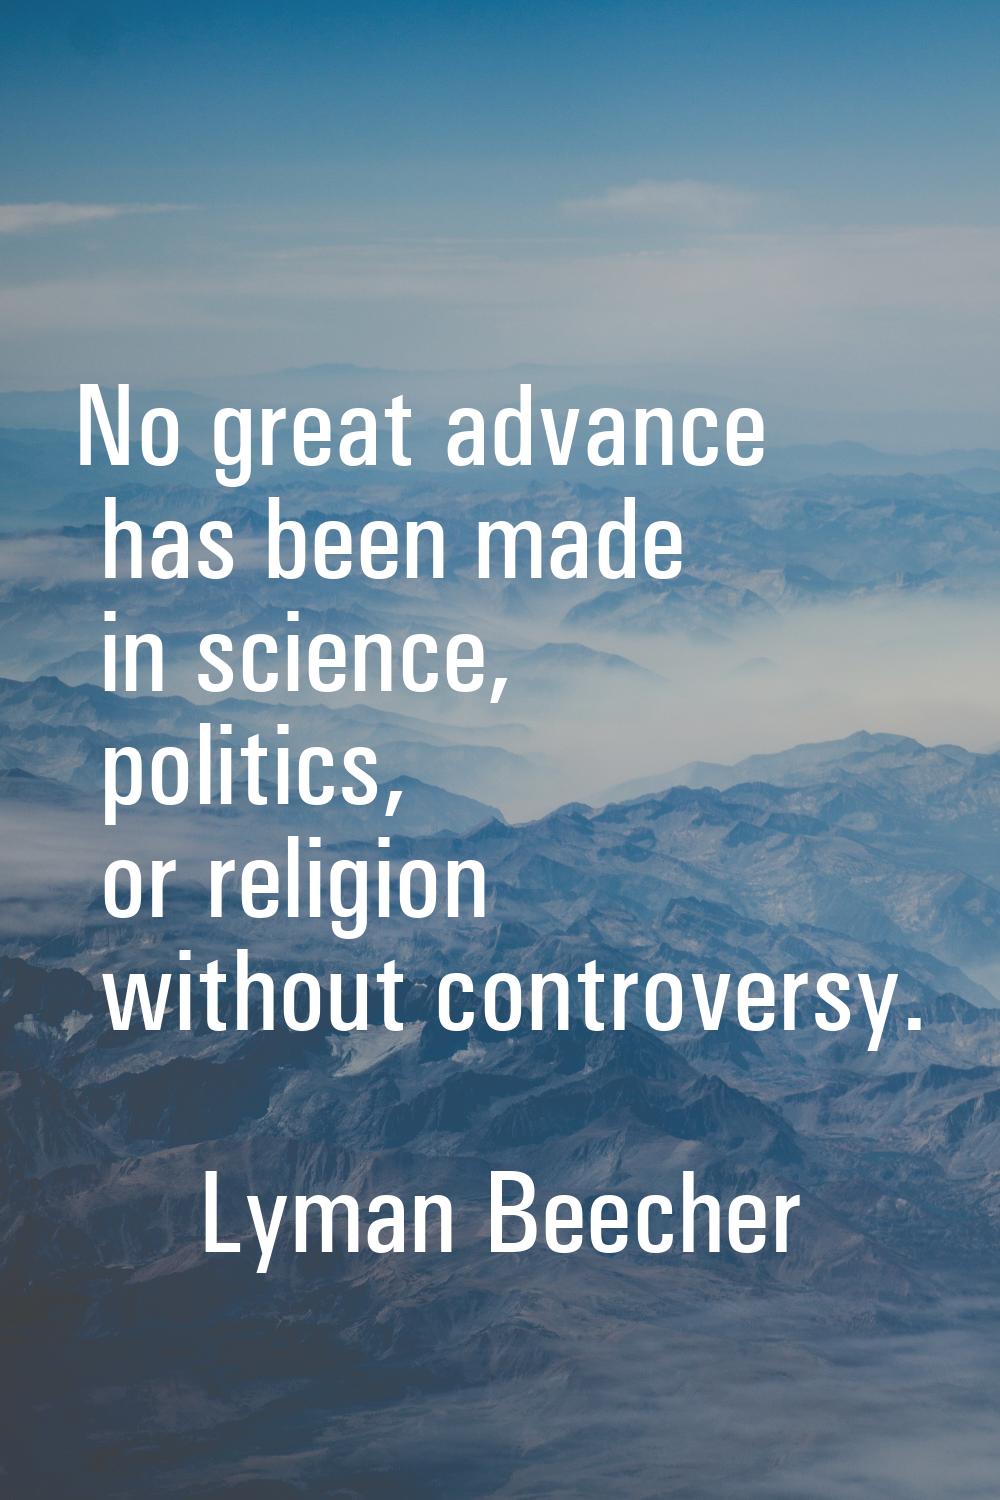 No great advance has been made in science, politics, or religion without controversy.